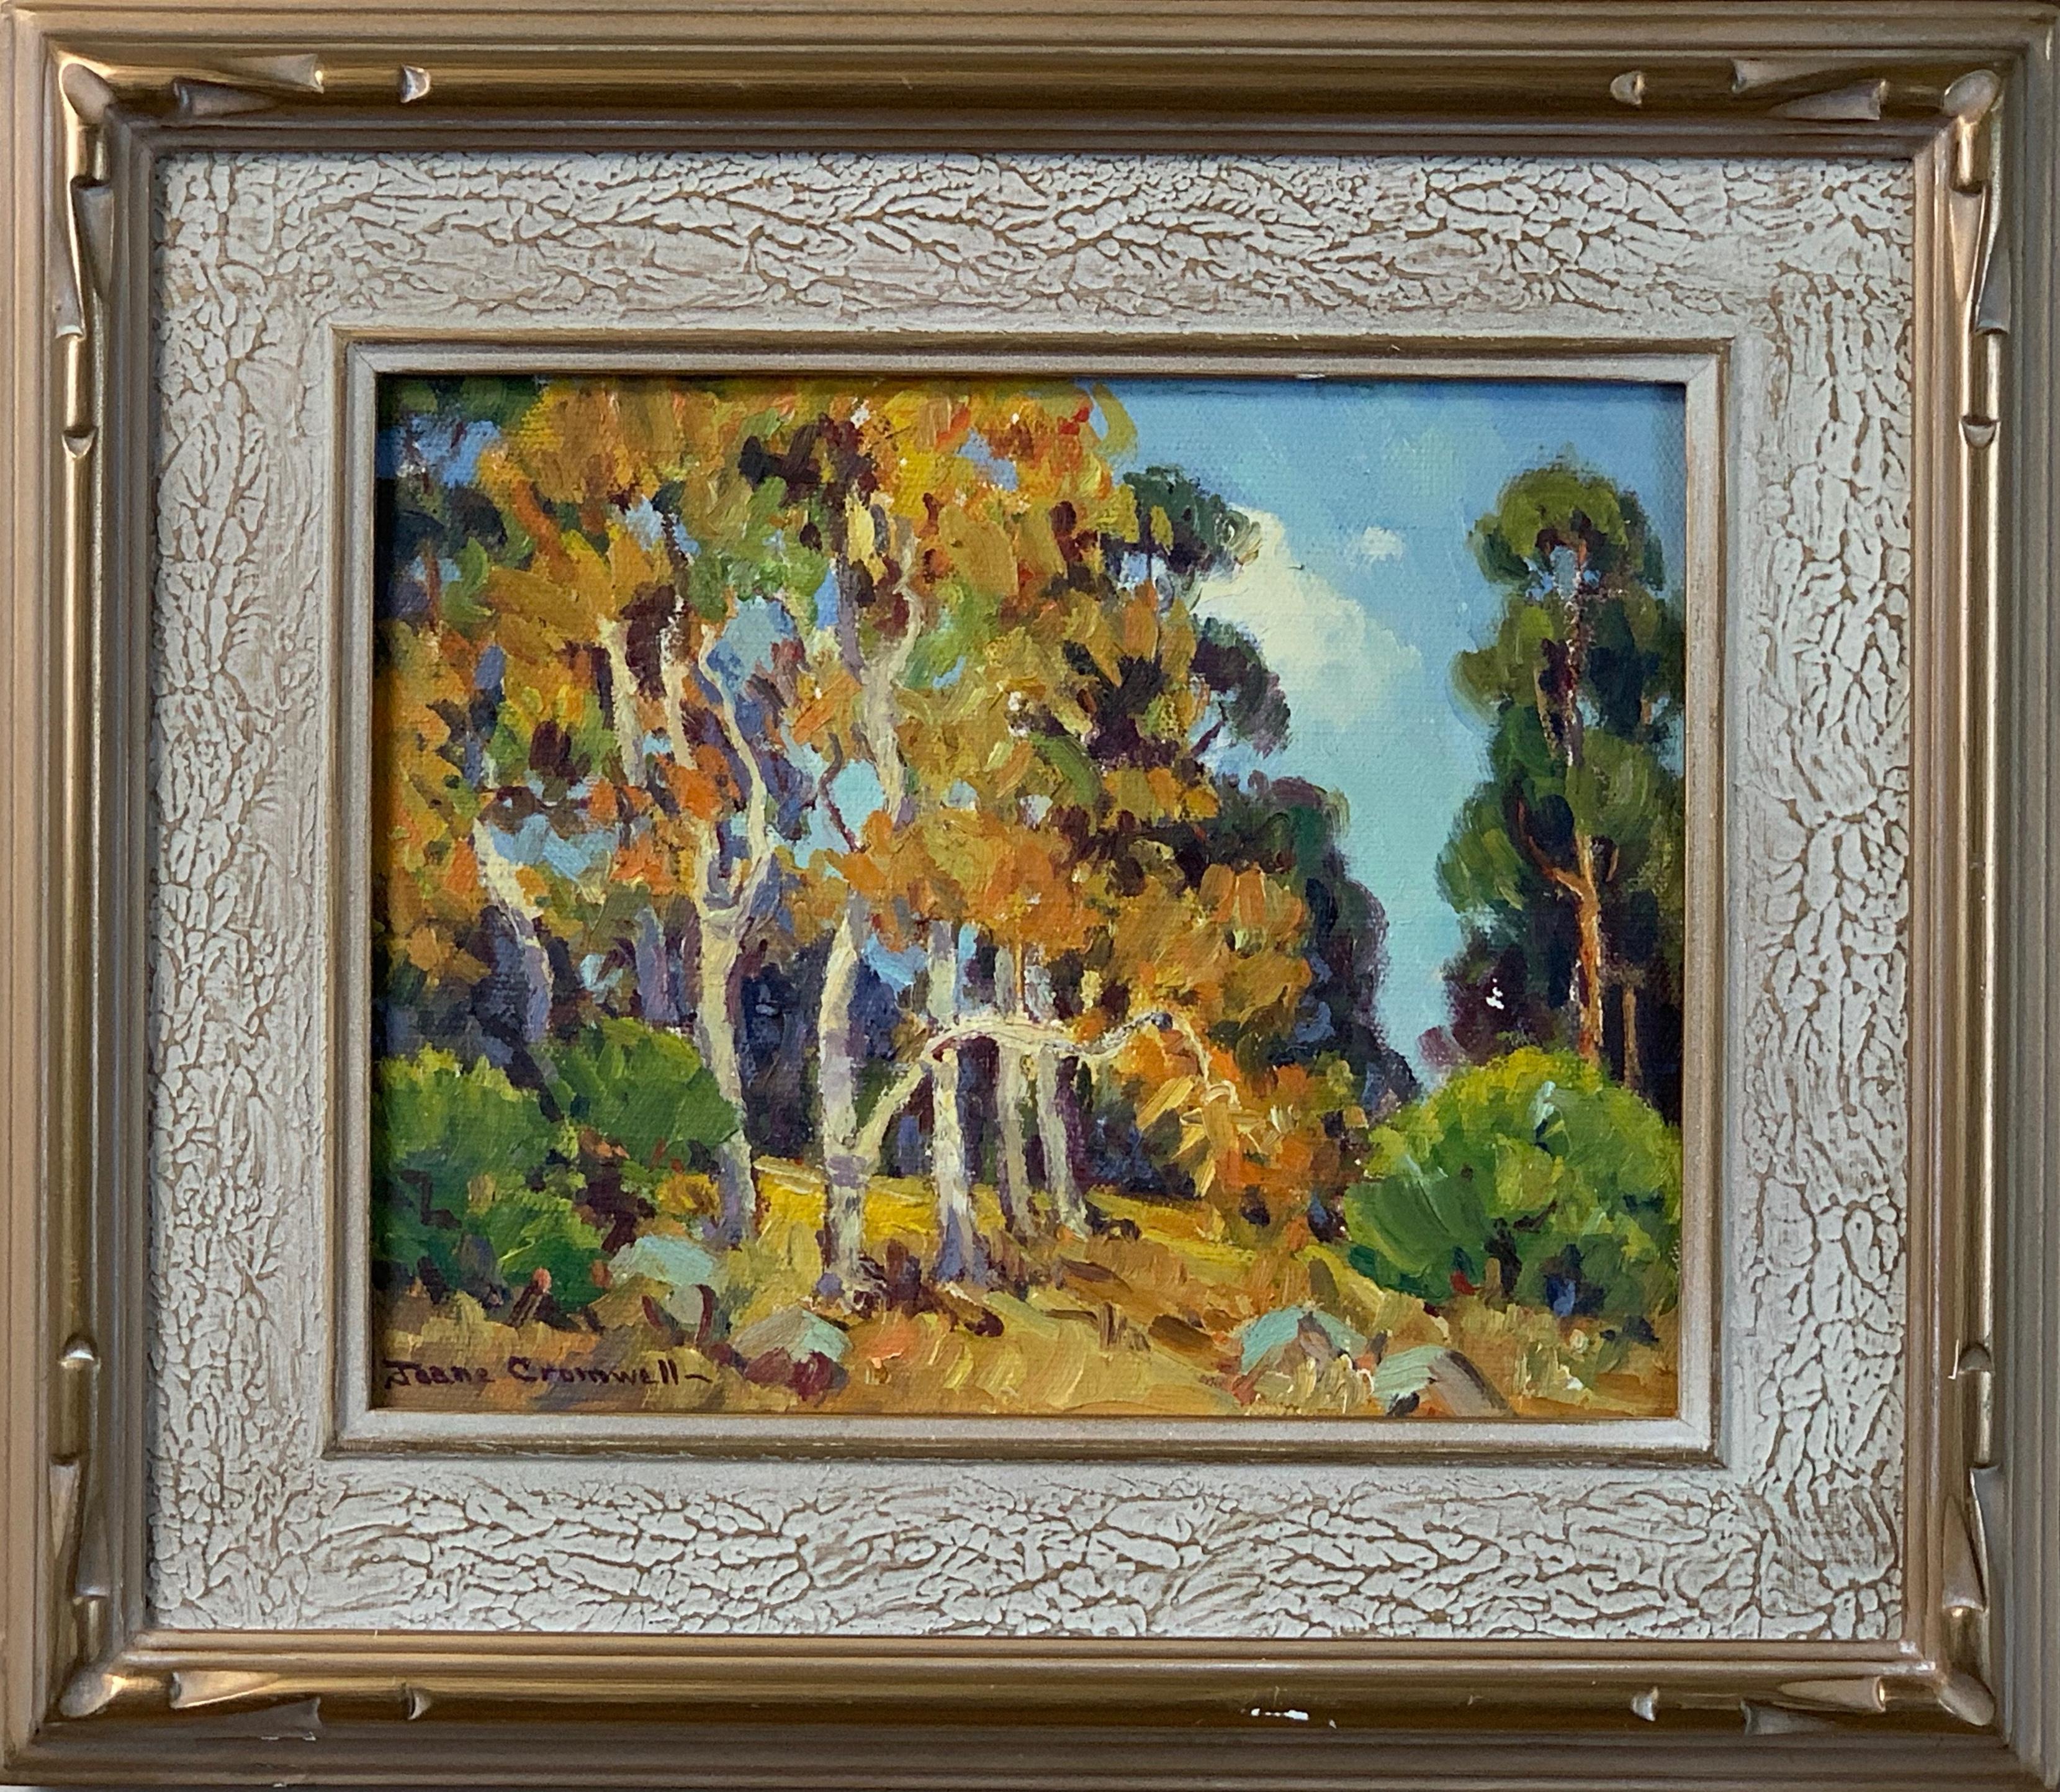 A small oil on board painting of Southern California Sycamores by noted Laguna Beach artist Joane Cromwell (1895-1969). Cromwell lived and worked in various places including Laguna Beach and Dana Point.